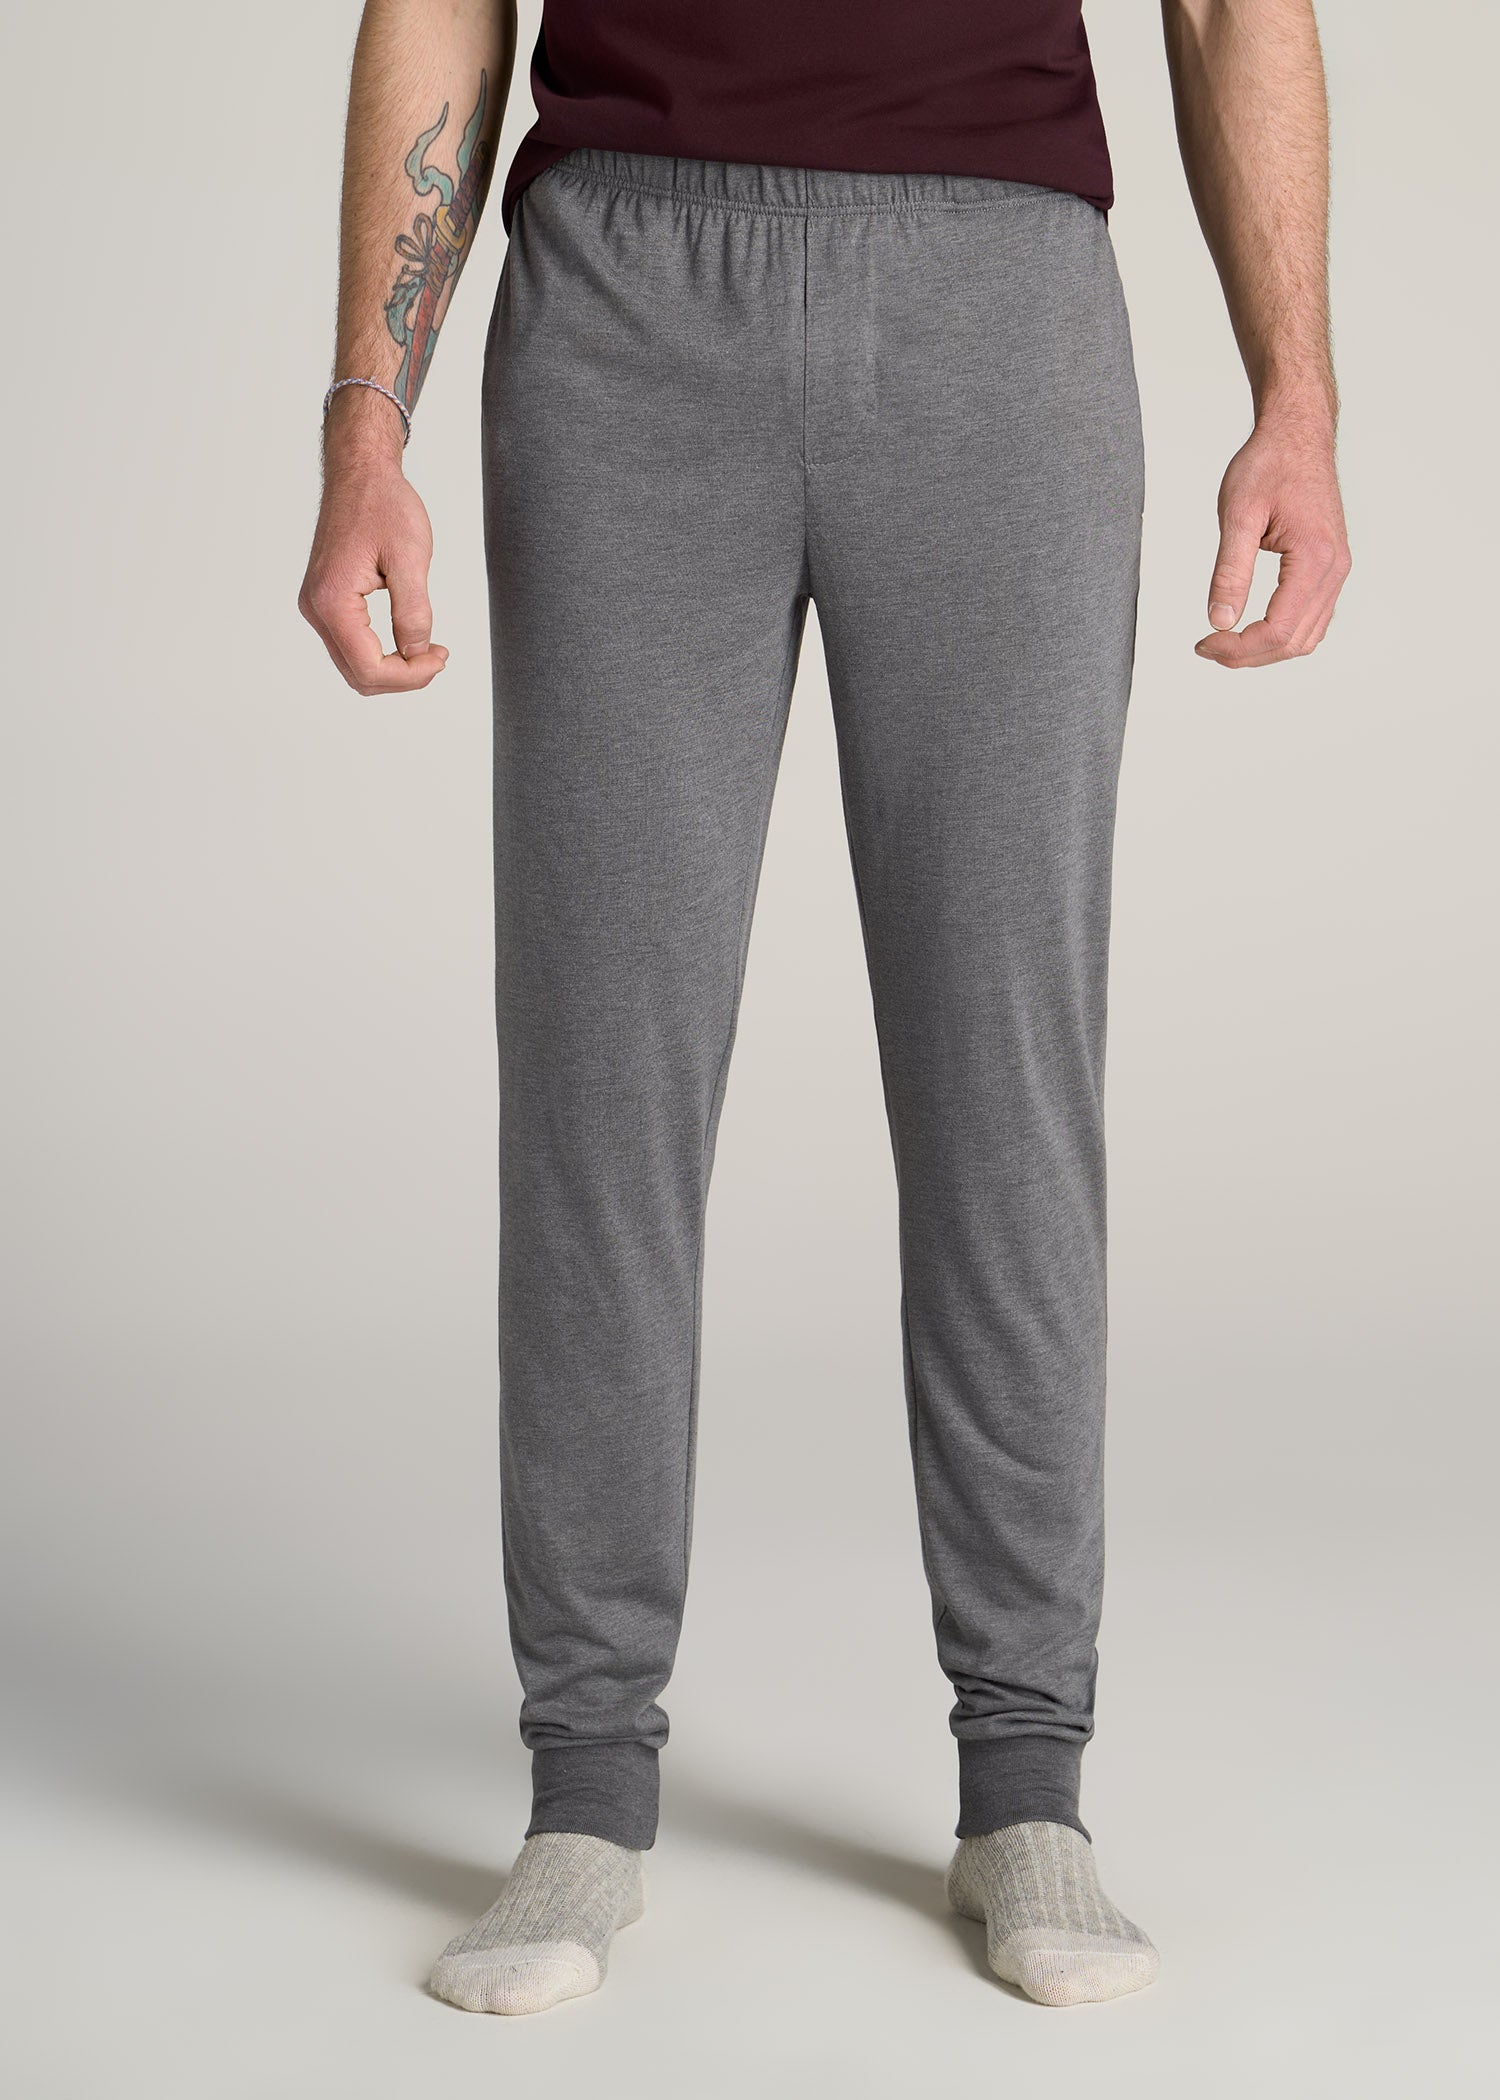 American-Tall-Men-Lounge-Pant-Joggers-Charcoal-front